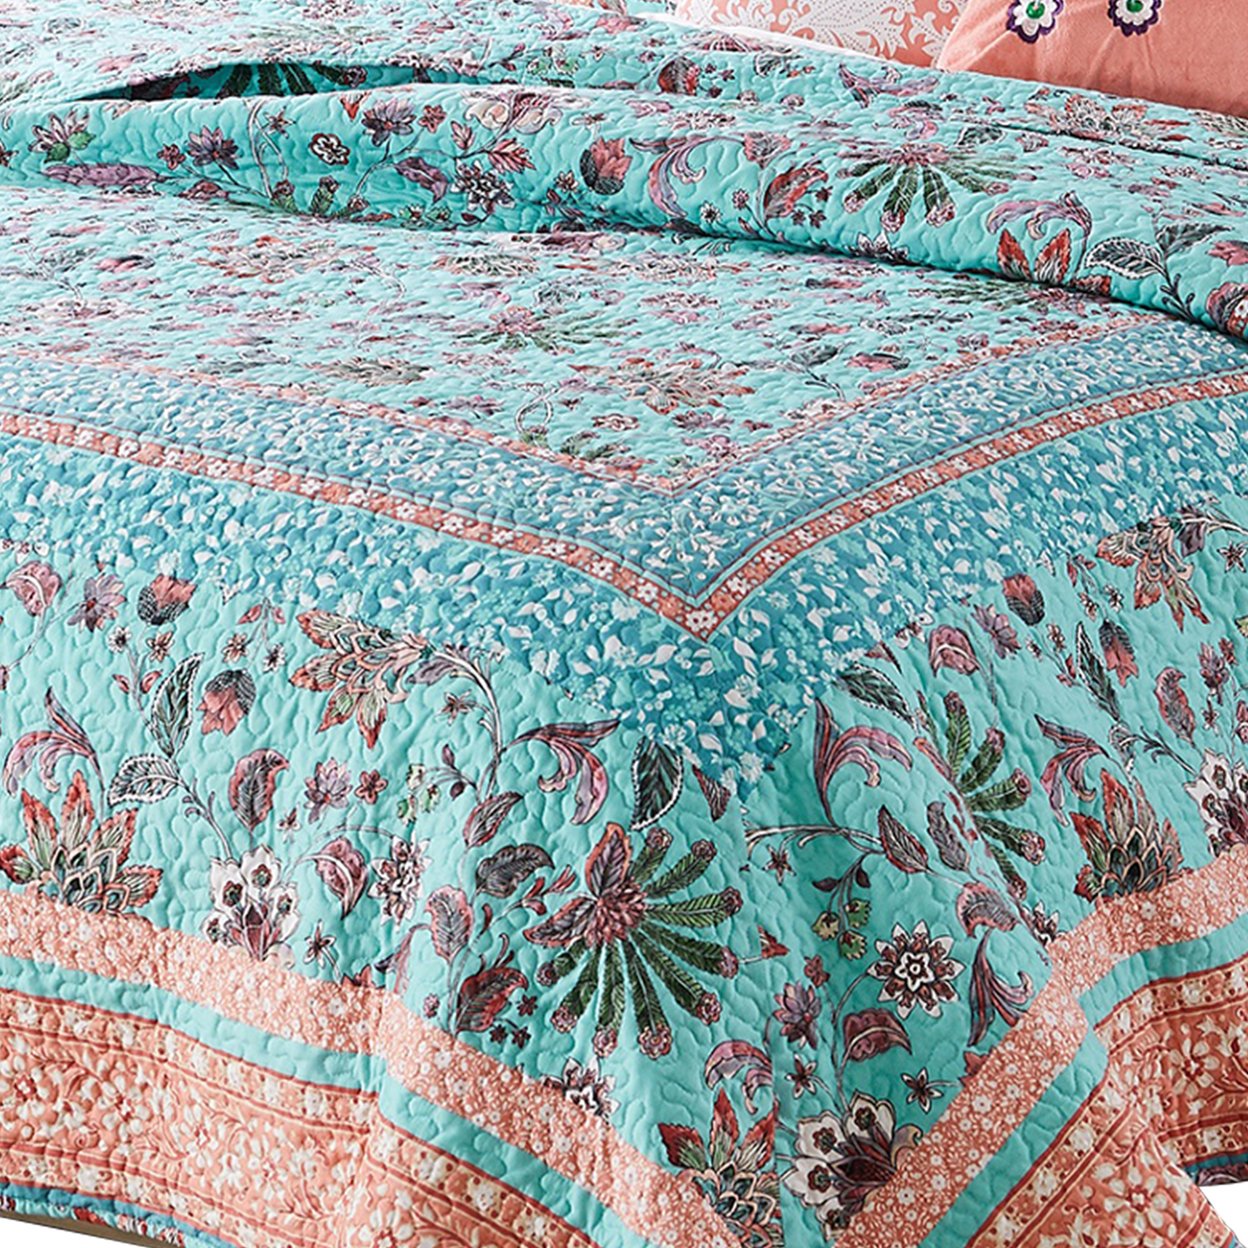 3 Piece King Quilt Set With Floral Print, Blue And White- Saltoro Sherpi